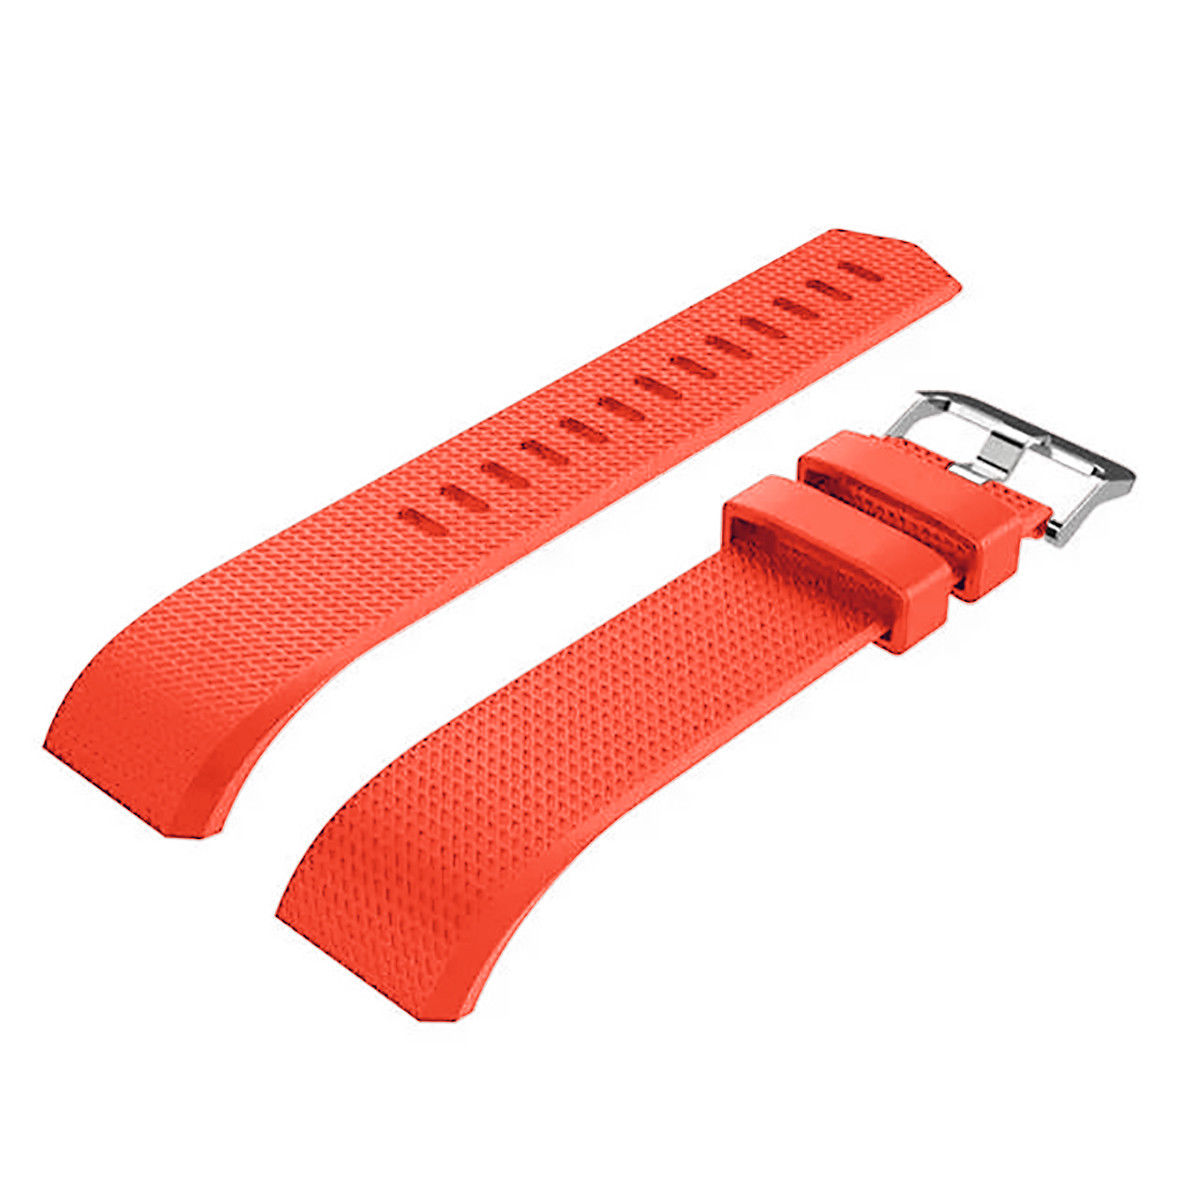 Fitbit Charge 2 Watch Bands, Mignova Soft Silicone Replacement Sport Watch Wrist Band Strap for Fitbit Charge 2 Fitness Tracker - Large Size (Orange) - image 5 of 5